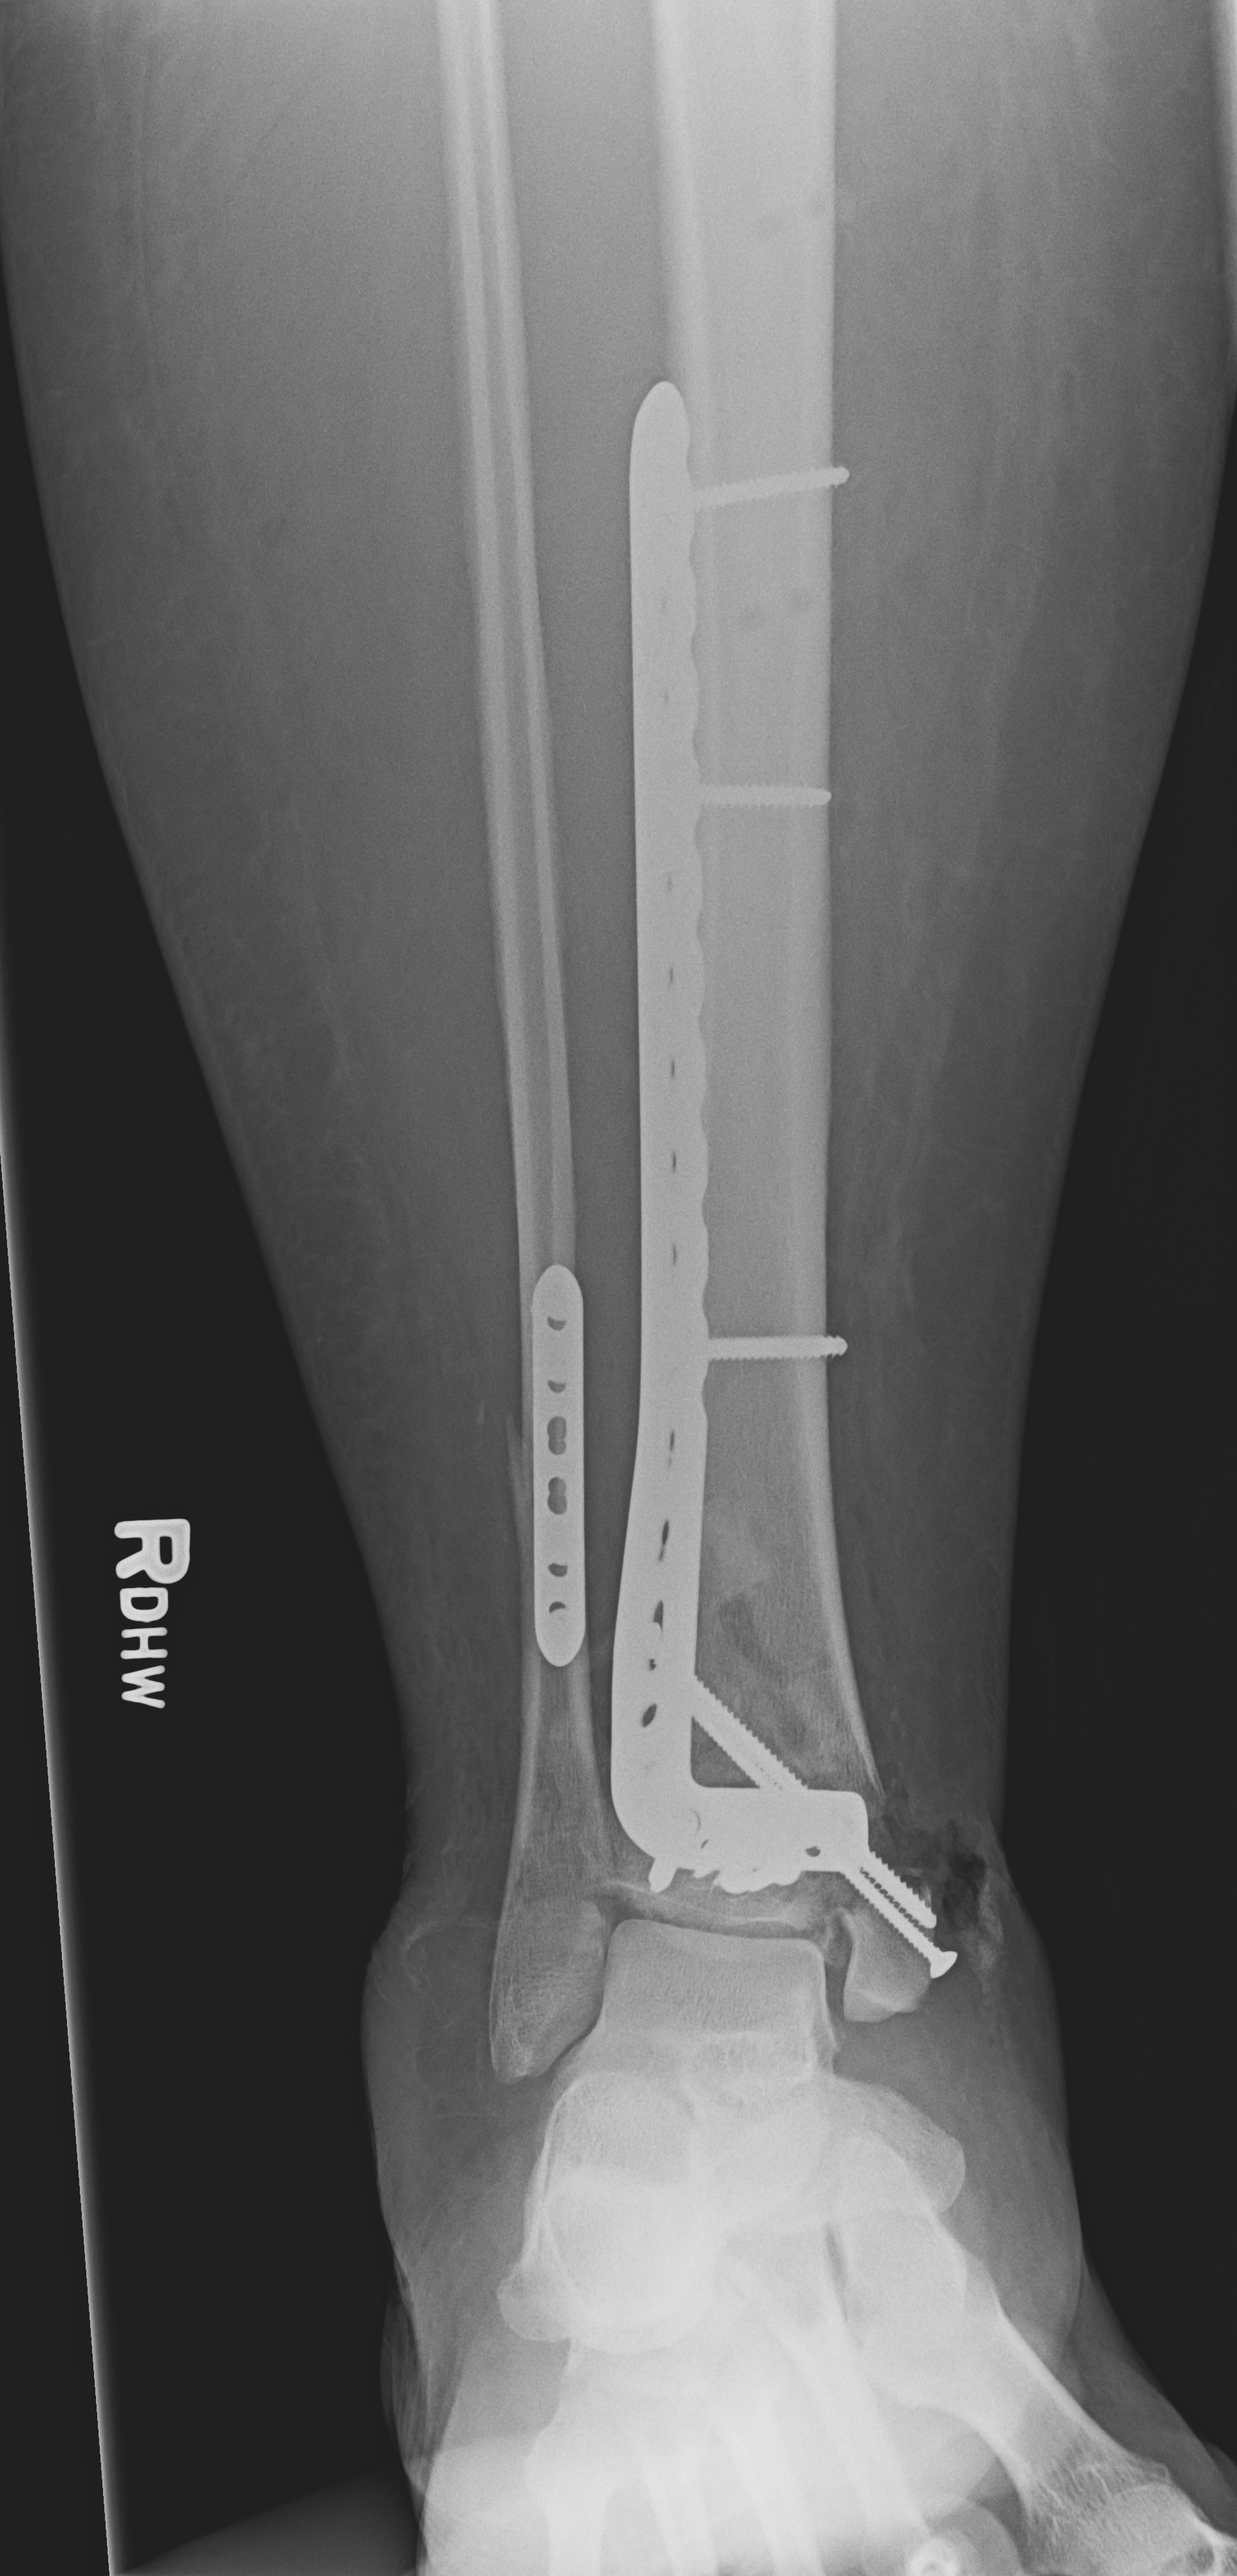 Postoperative AP x-ray shows placement of an anterolateral distal tibia plate with anatomic reduction of the distal tibial and fibular fractures and a congruent mortise